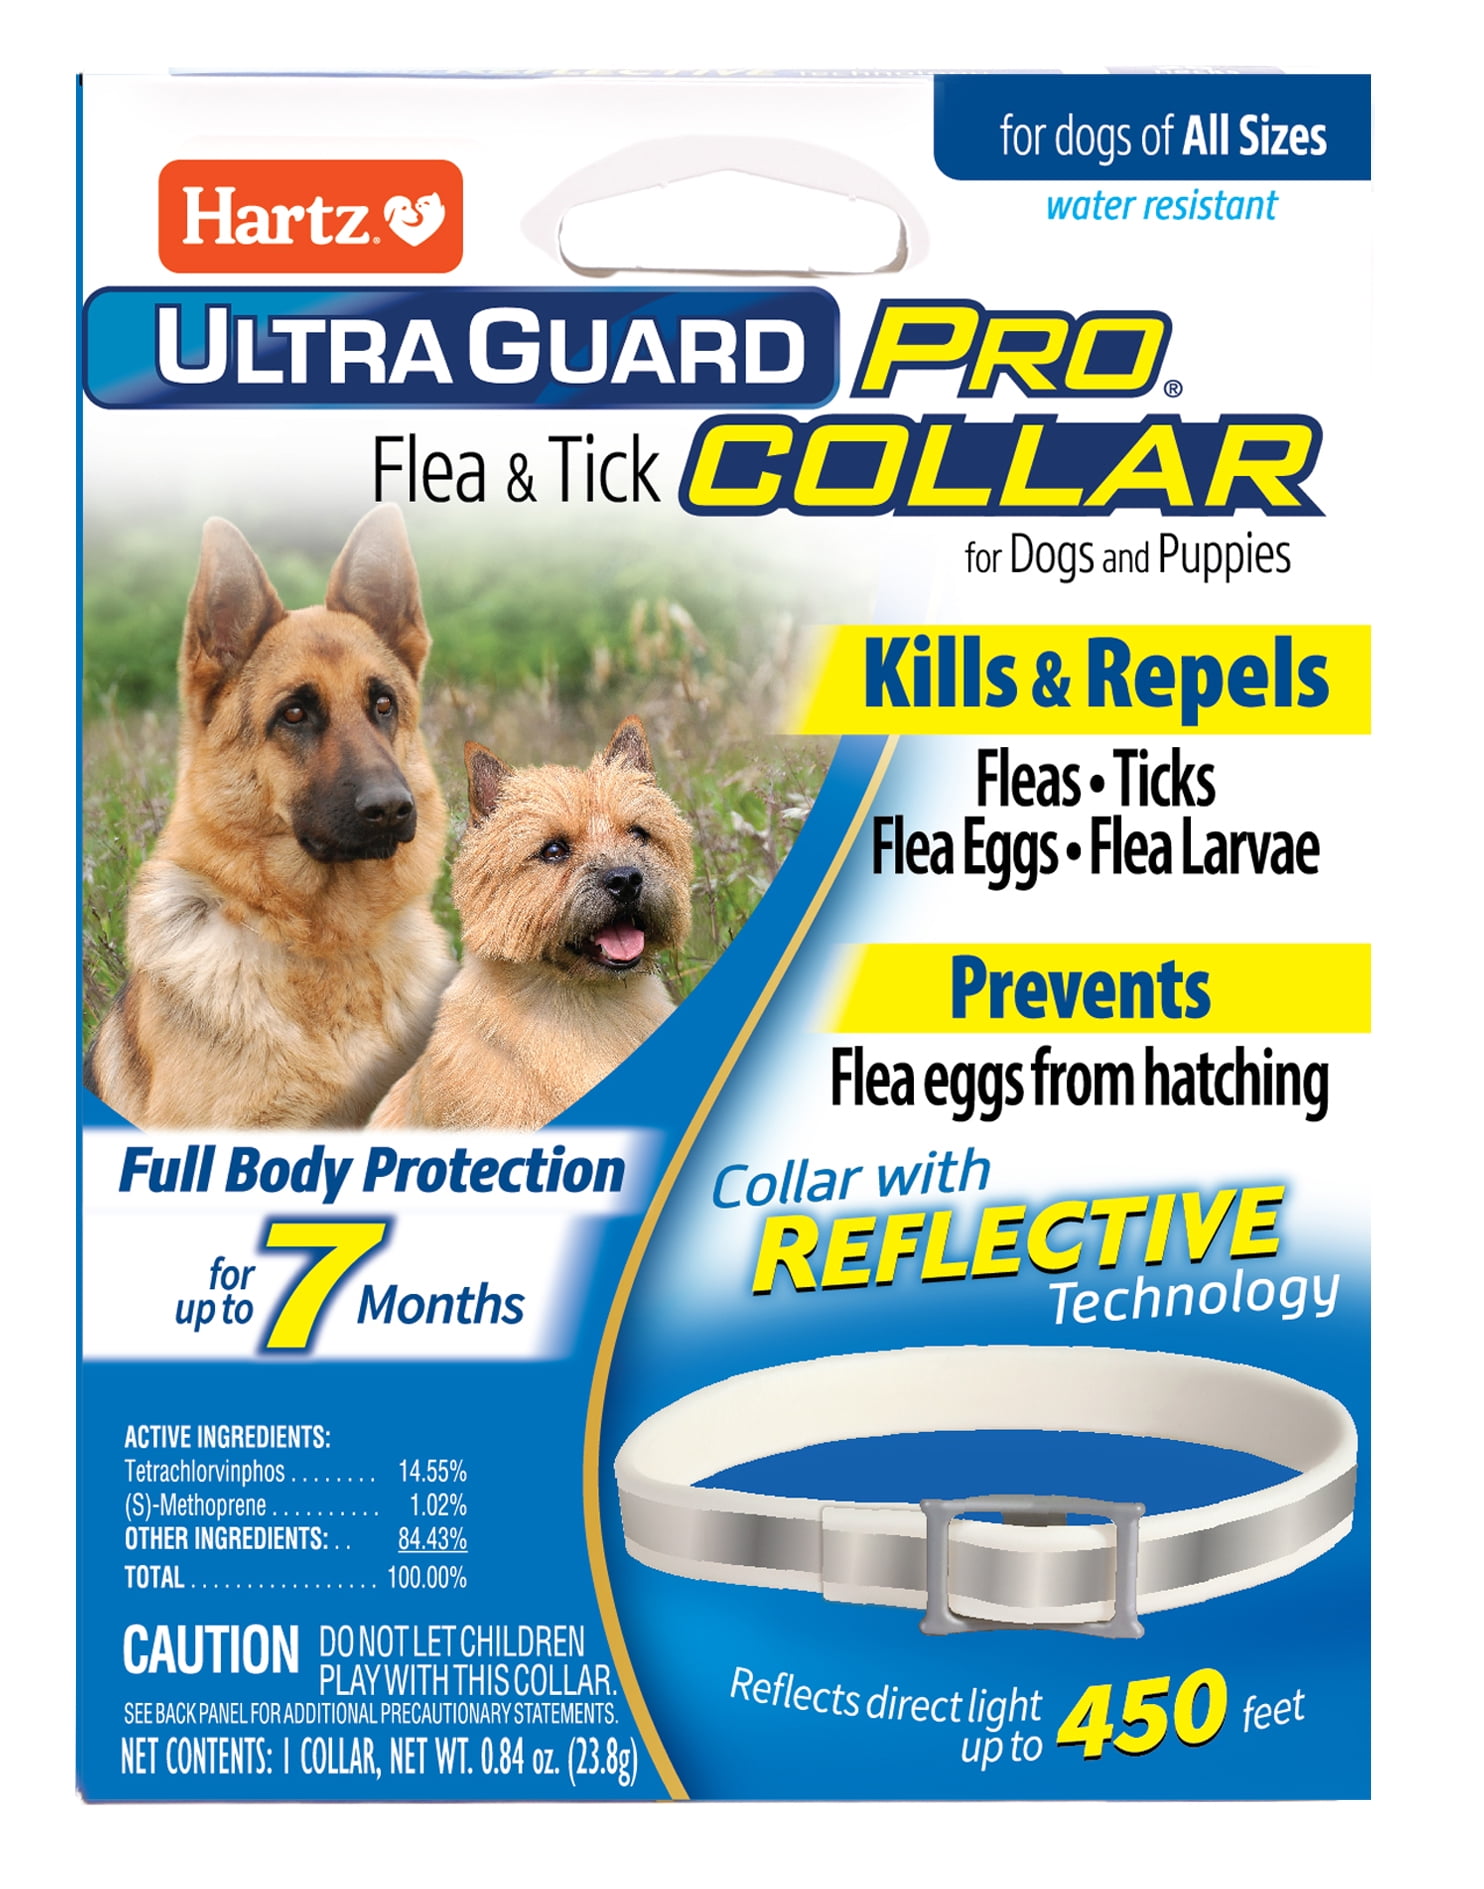 Hartz UltraGuard Pro Reflective Flea And Tick Collar For Dogs And Puppies, 7 Months Protection, 1ct